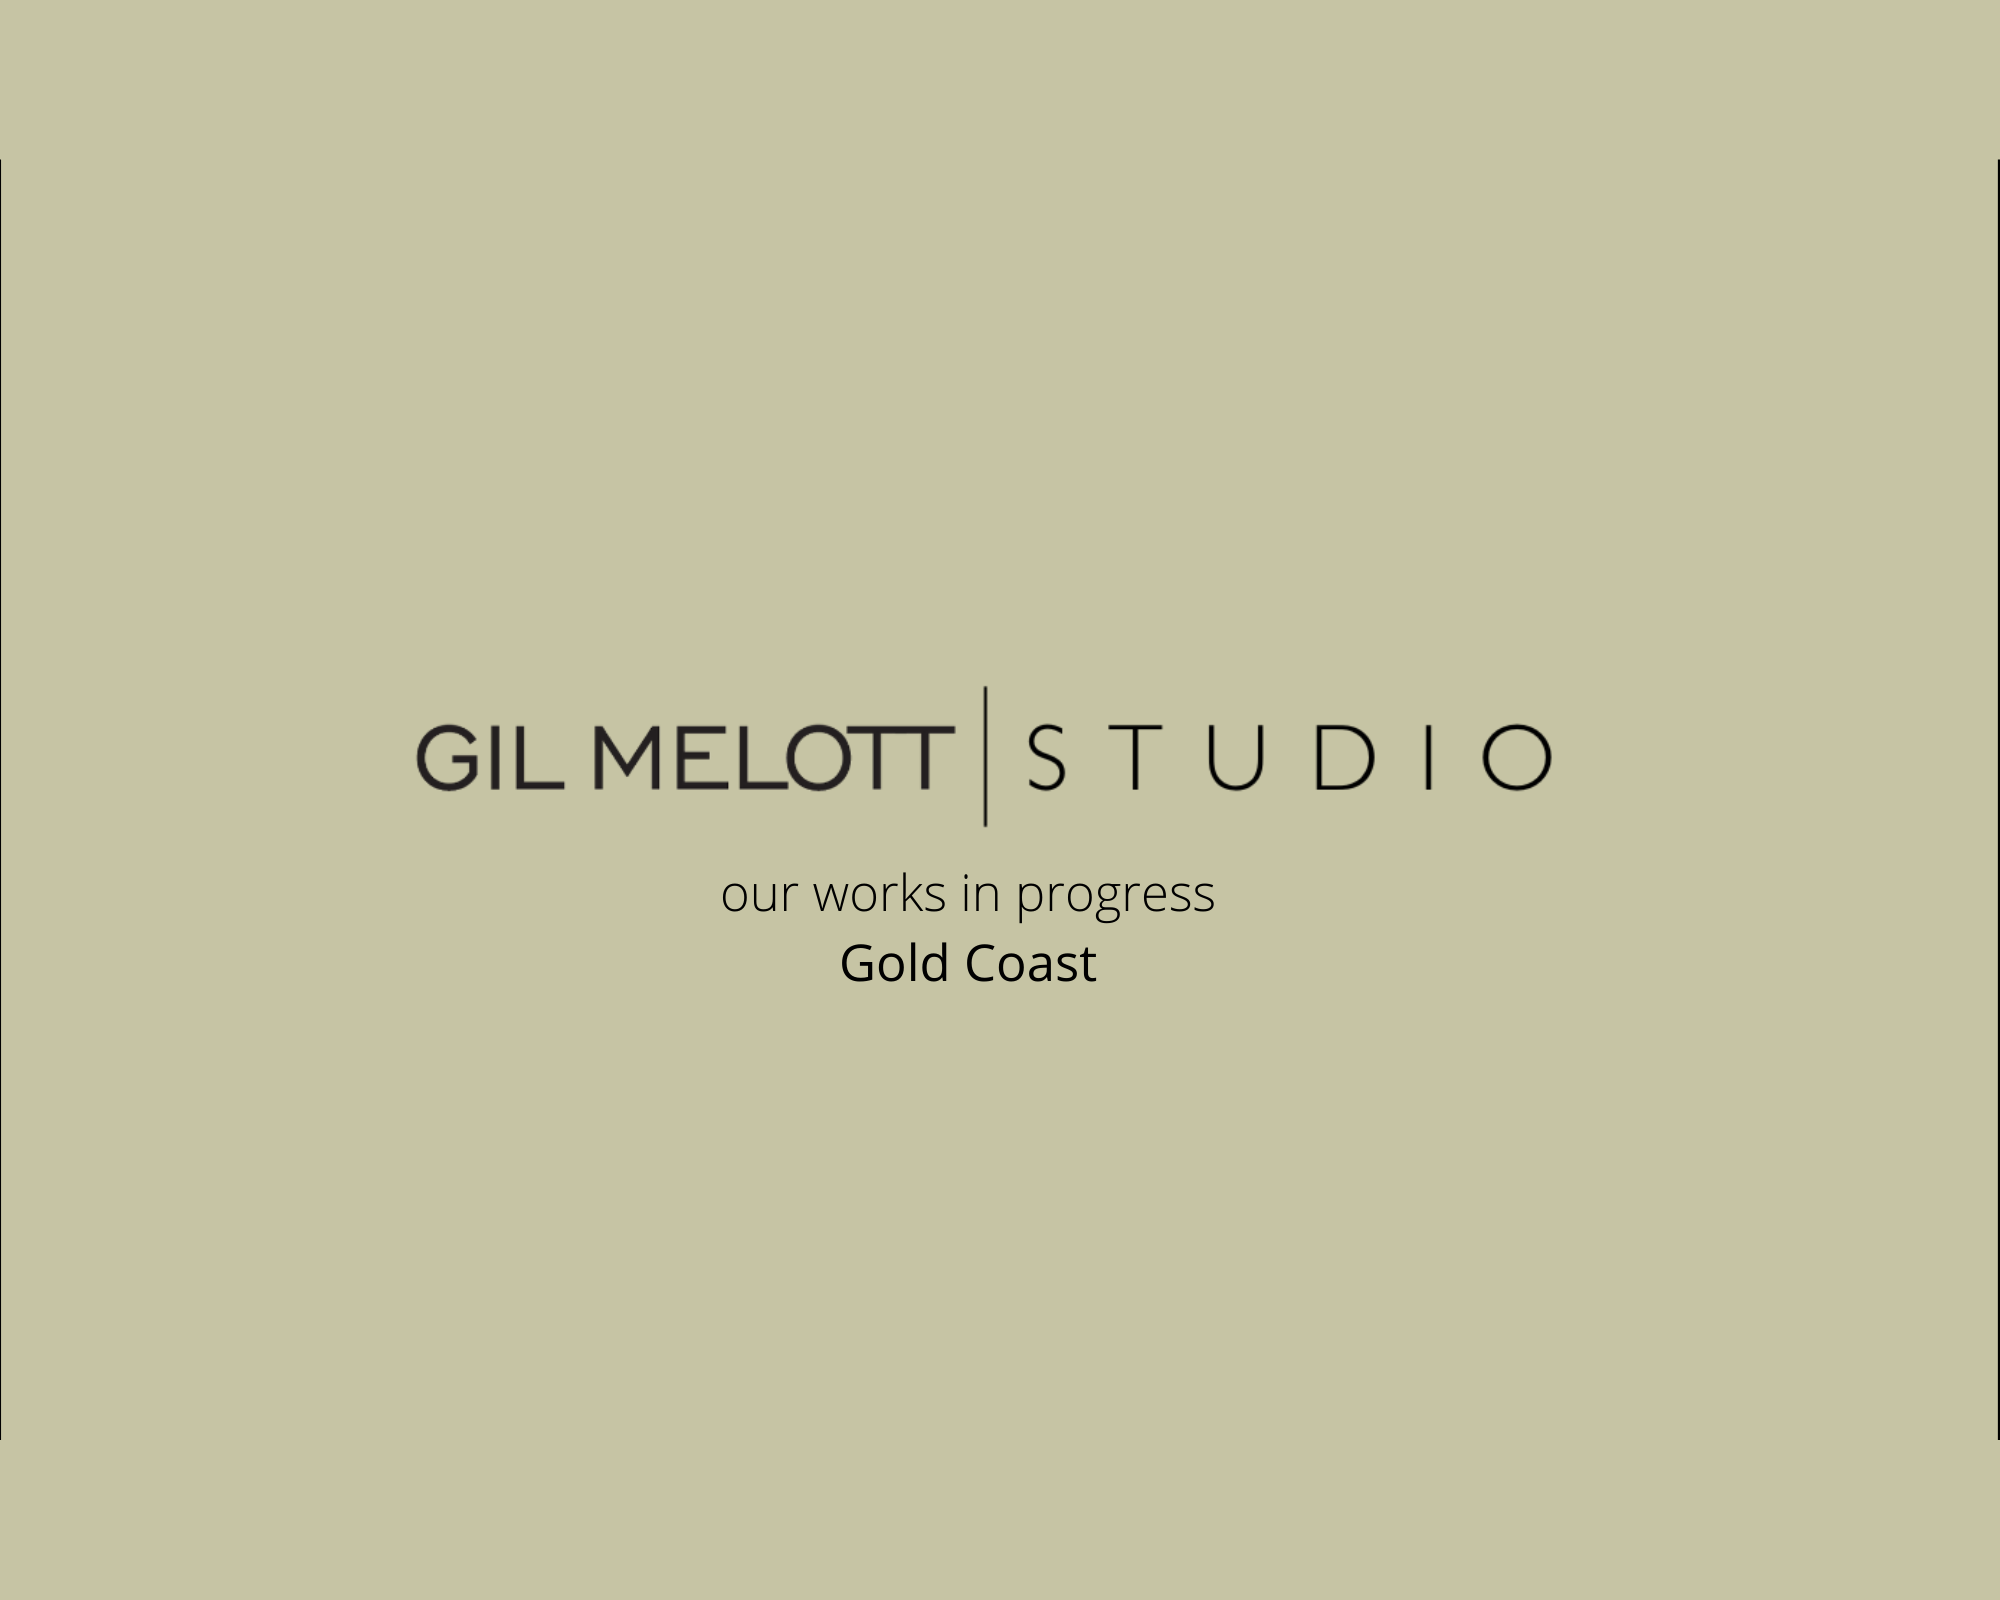 Gil Melott Studio is a luxury creative company focusing on high end residential and boutique hospitality interiors. Gil Melott Studio has been recognized for an unapologetic approach to integrating eras and styles in-11.png